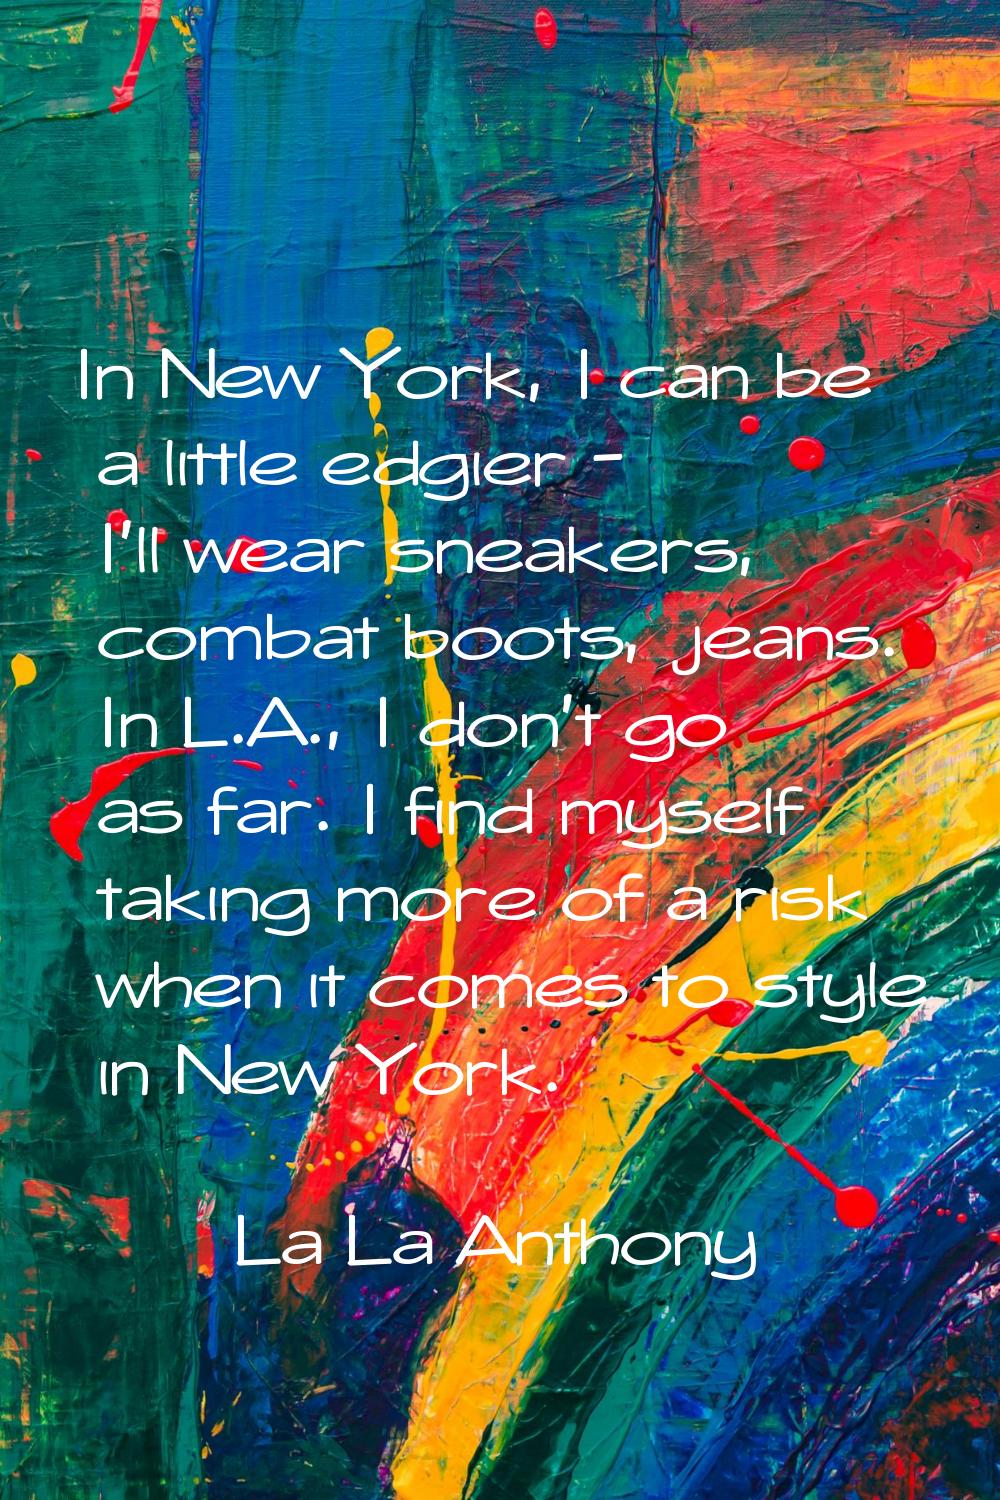 In New York, I can be a little edgier - I'll wear sneakers, combat boots, jeans. In L.A., I don't g